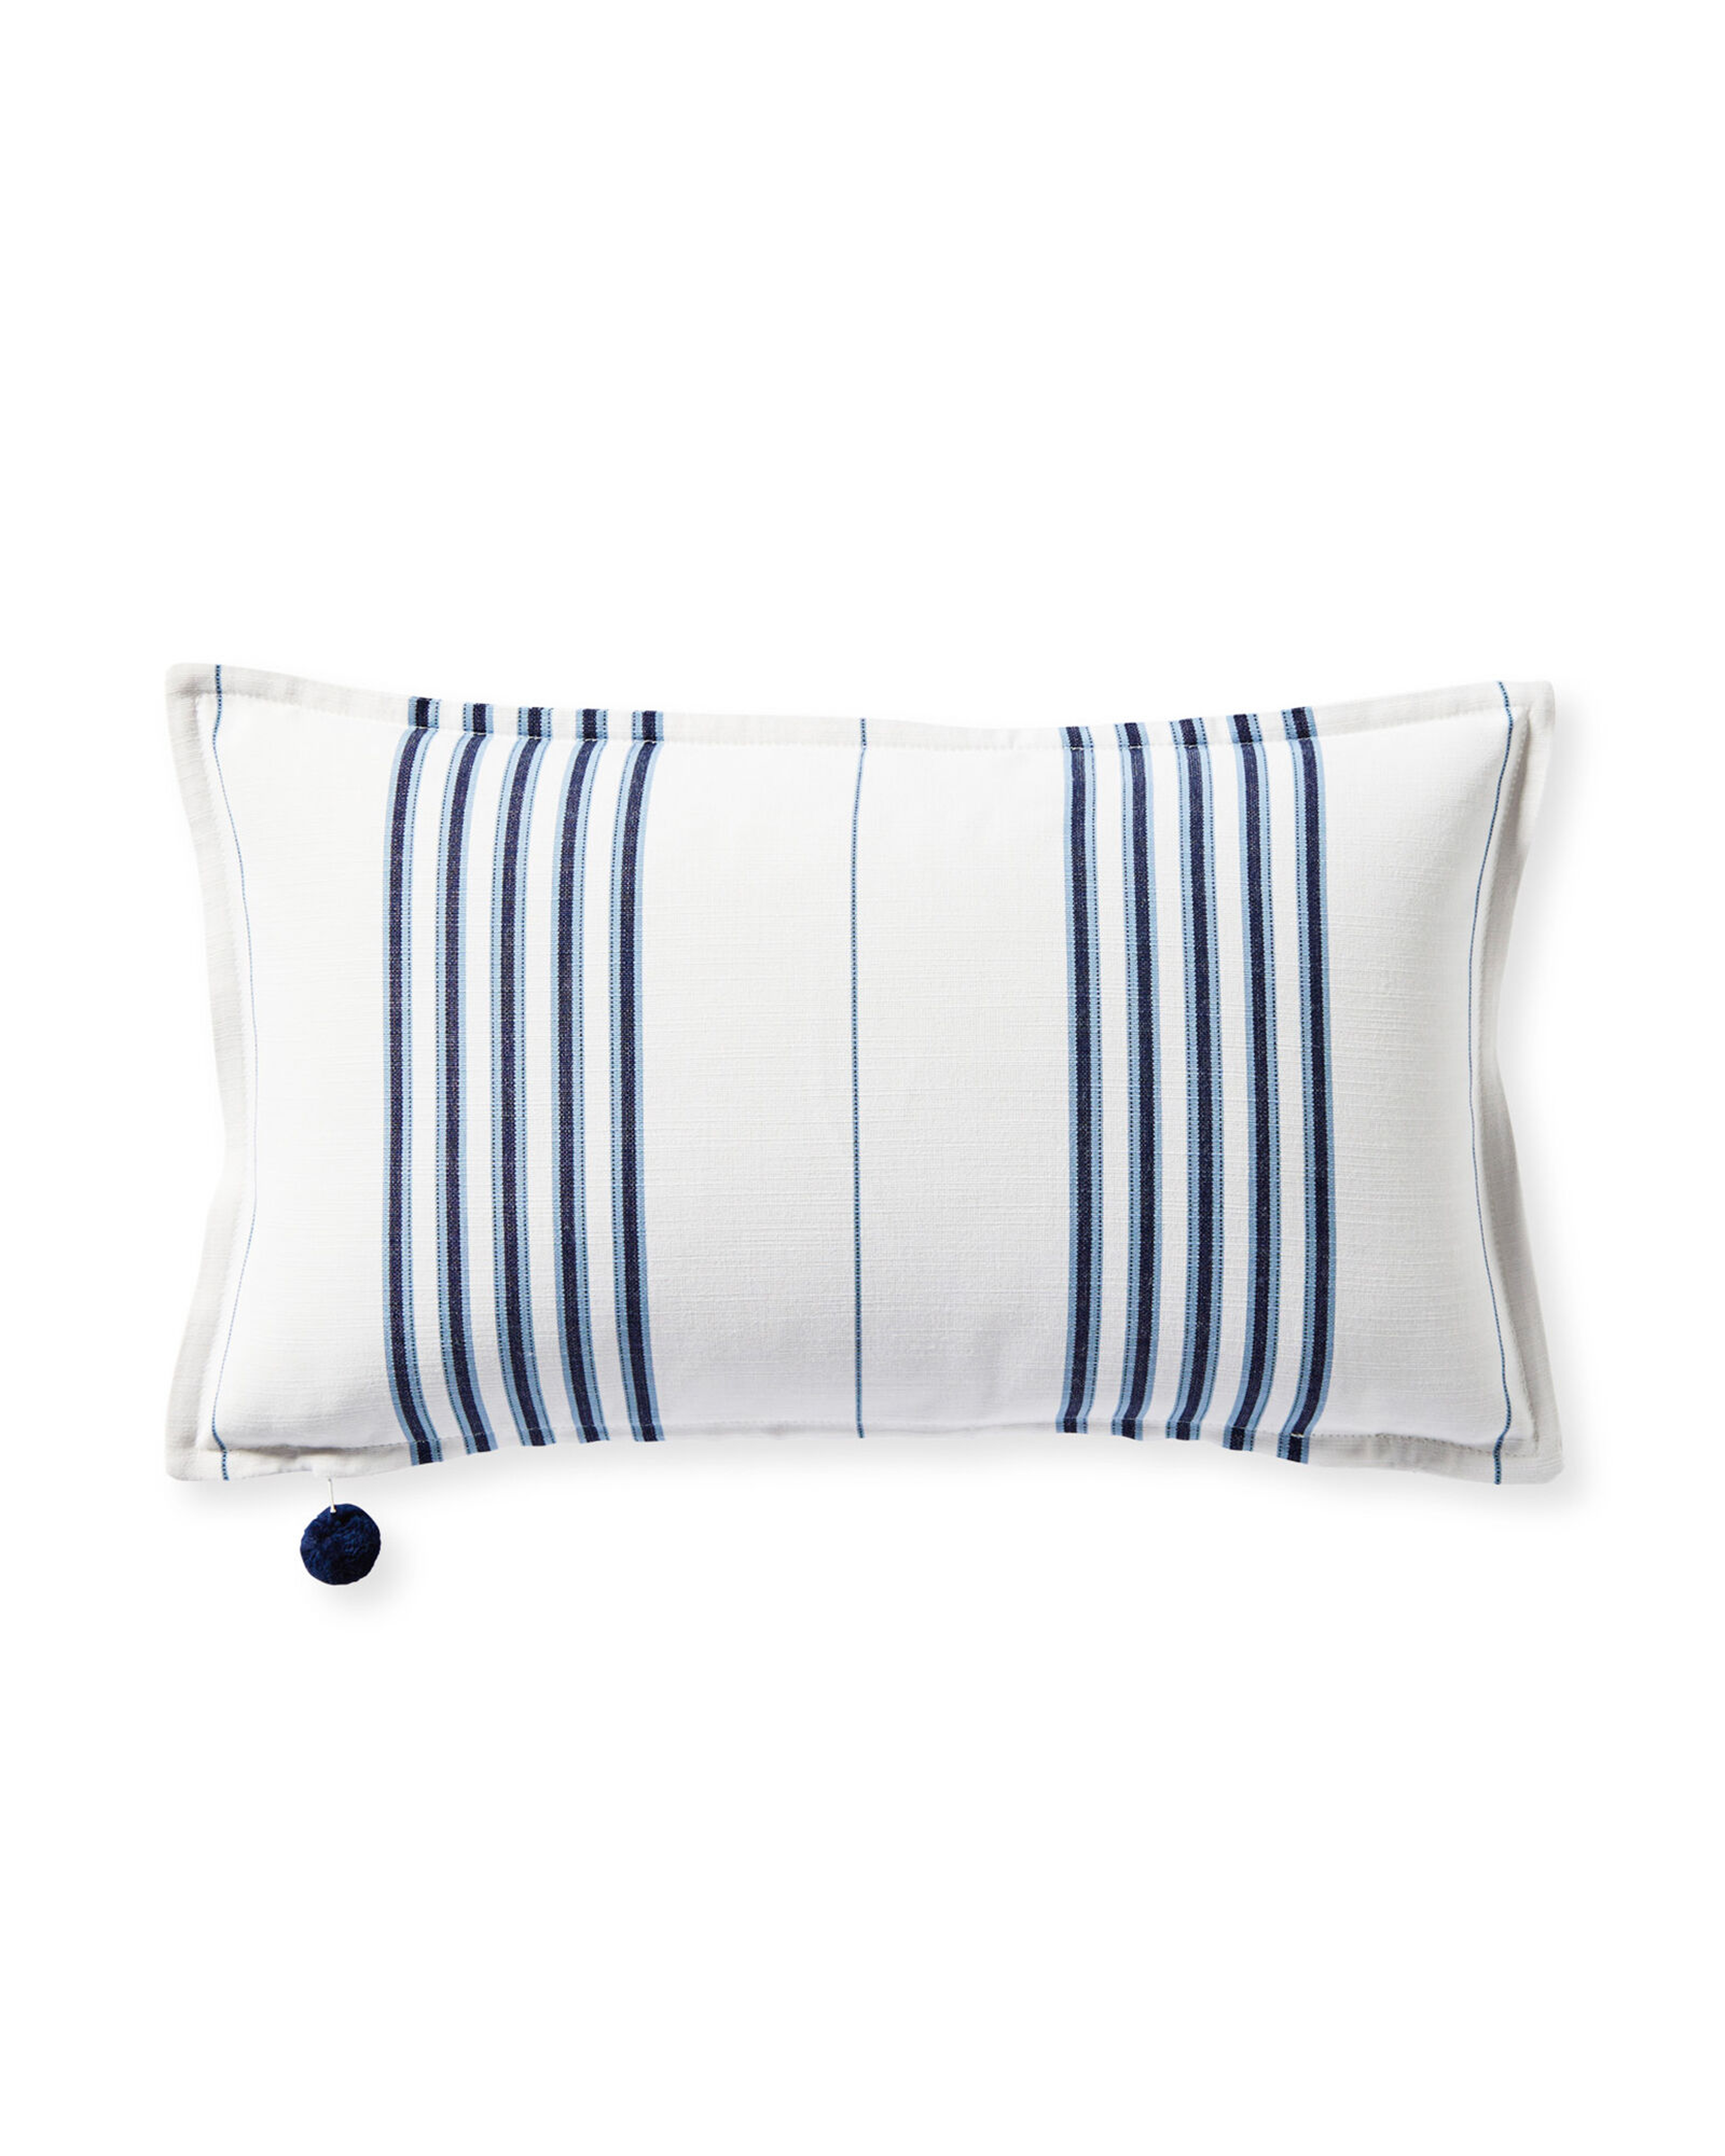 Perennials Lake Stripe Pillow Cover - Serena and Lily